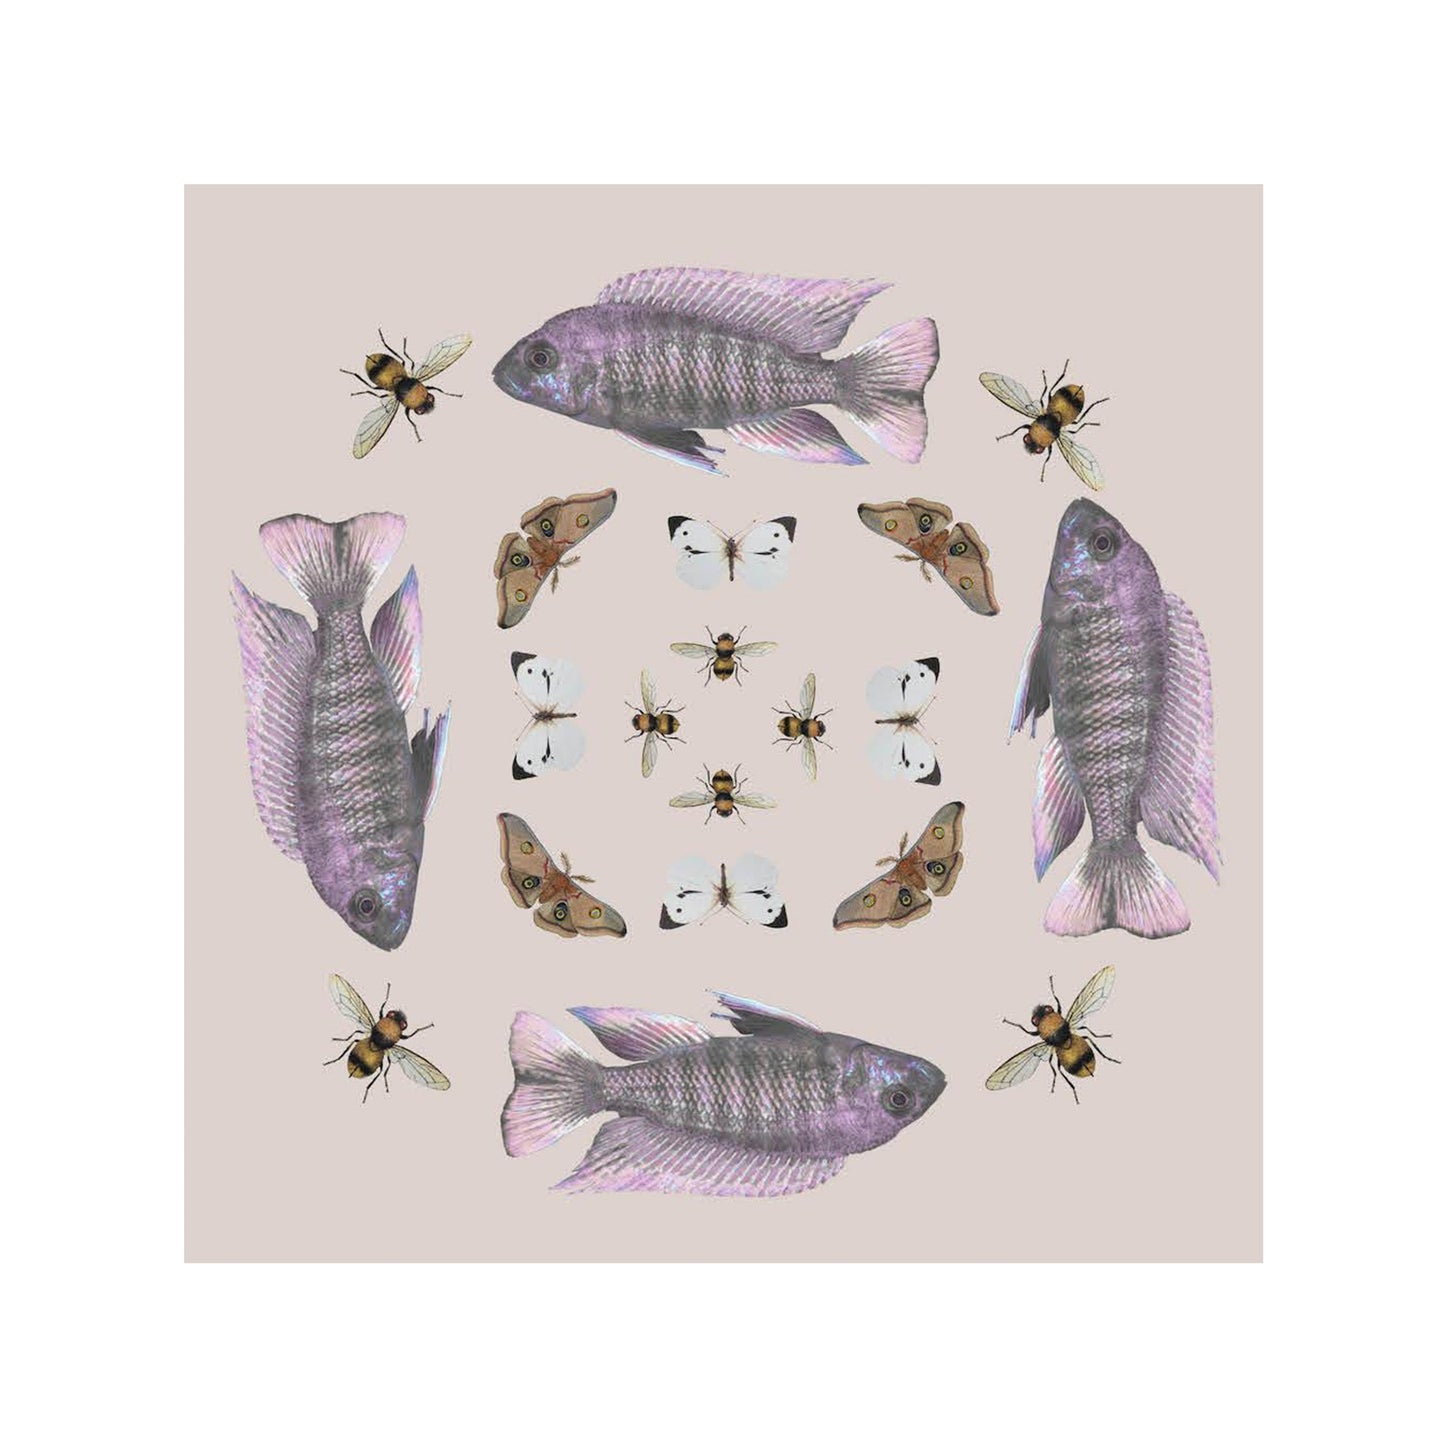 BUTTERFLY & FISH CASHMERE SCARF